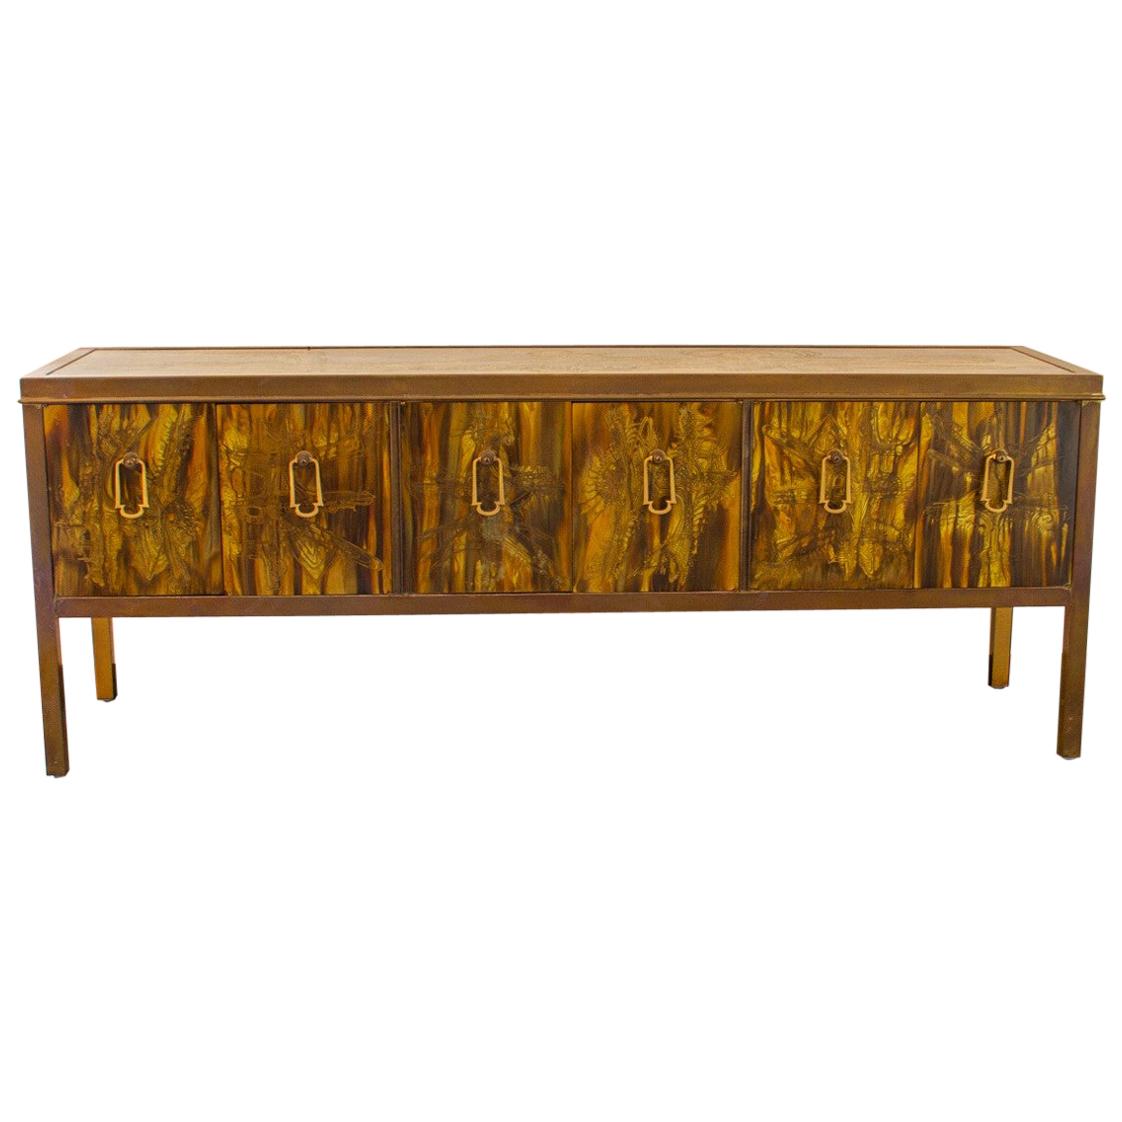 Stunning Acid Etched Cabinet by Bernard Rohne for Mastercraft, USA, 1970s